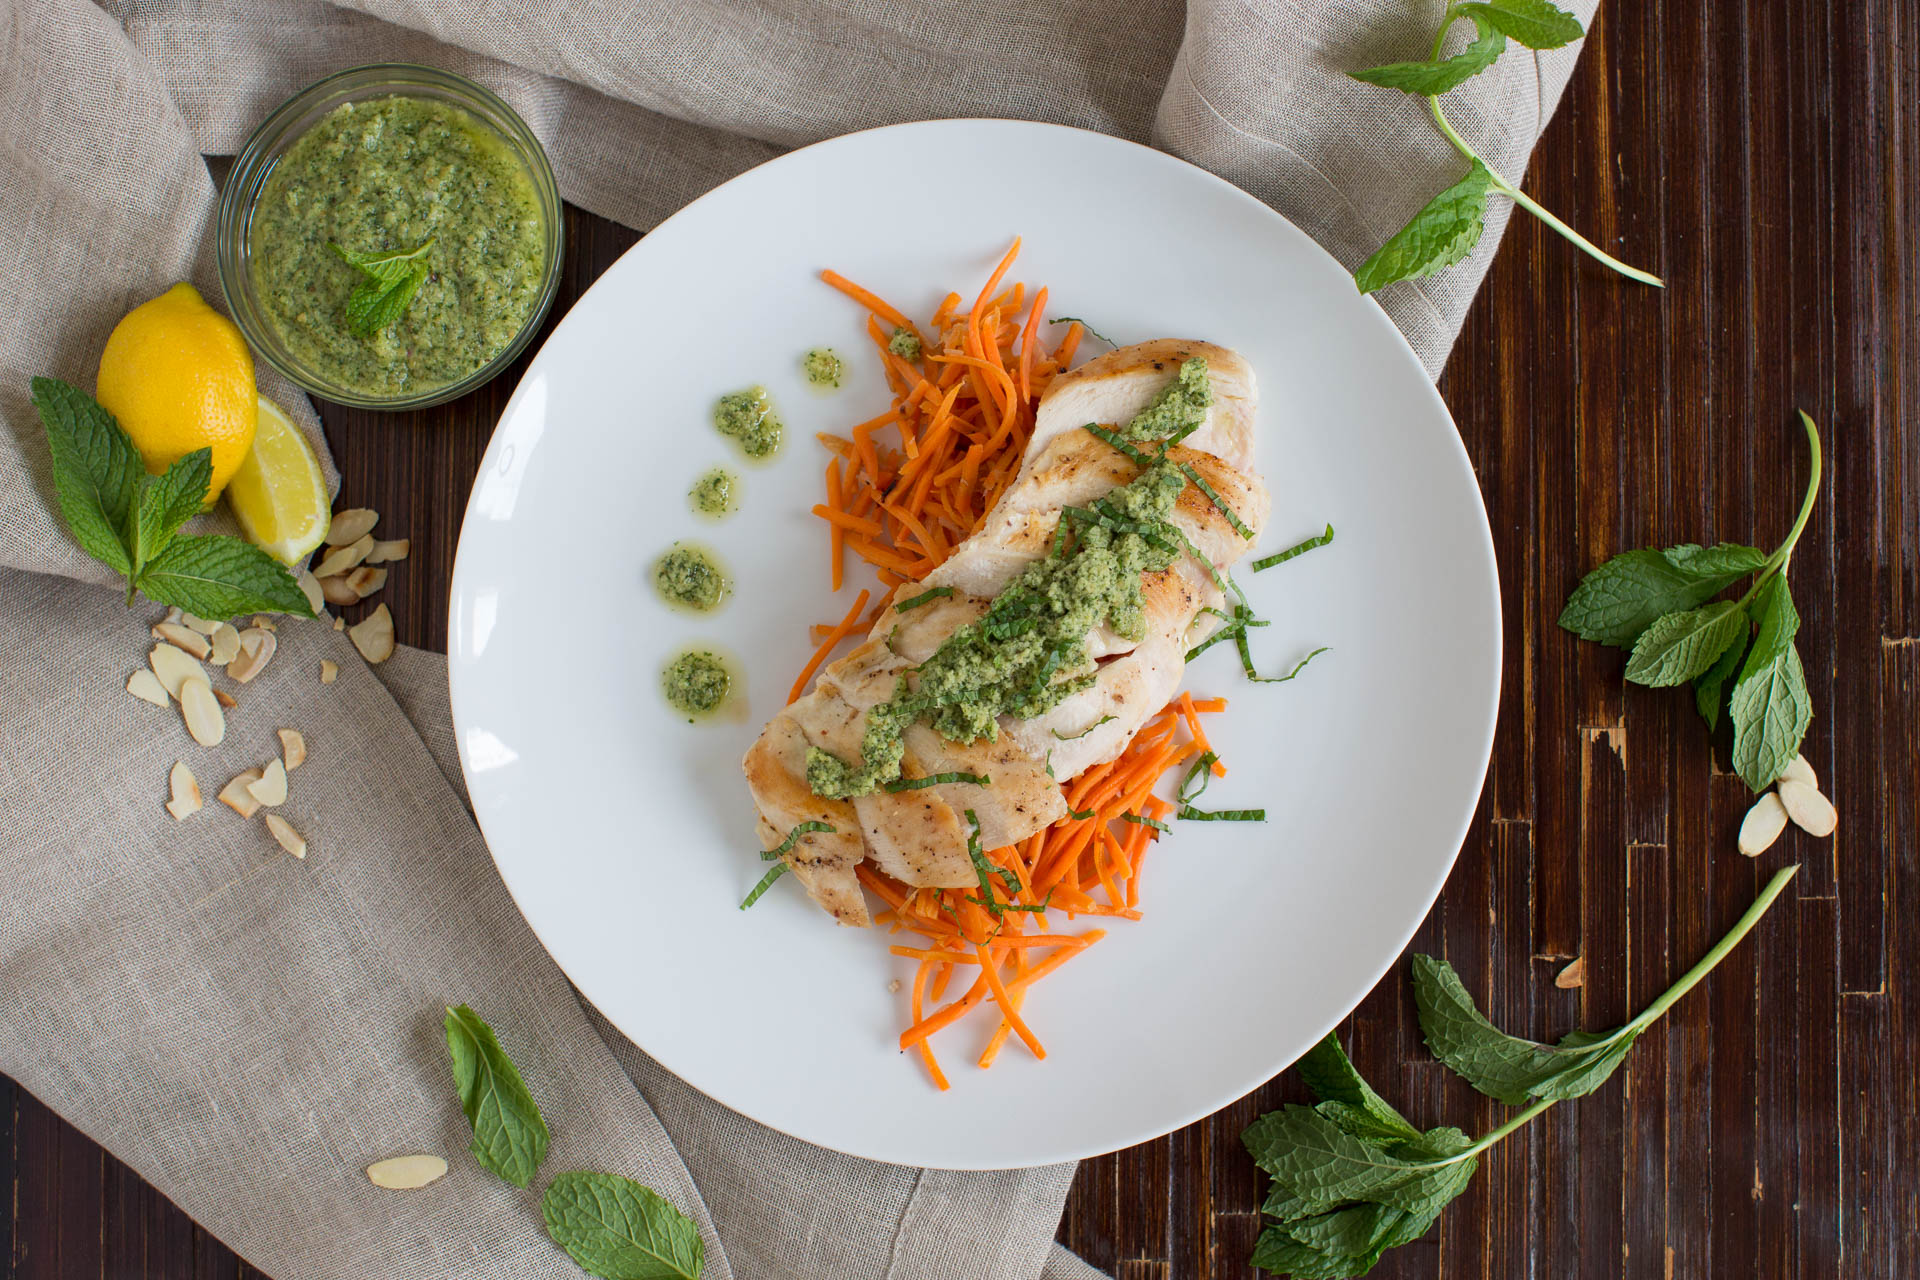 Pan-Seared Chicken Breast with Mint Pesto and Sauteed Shredded Carrots